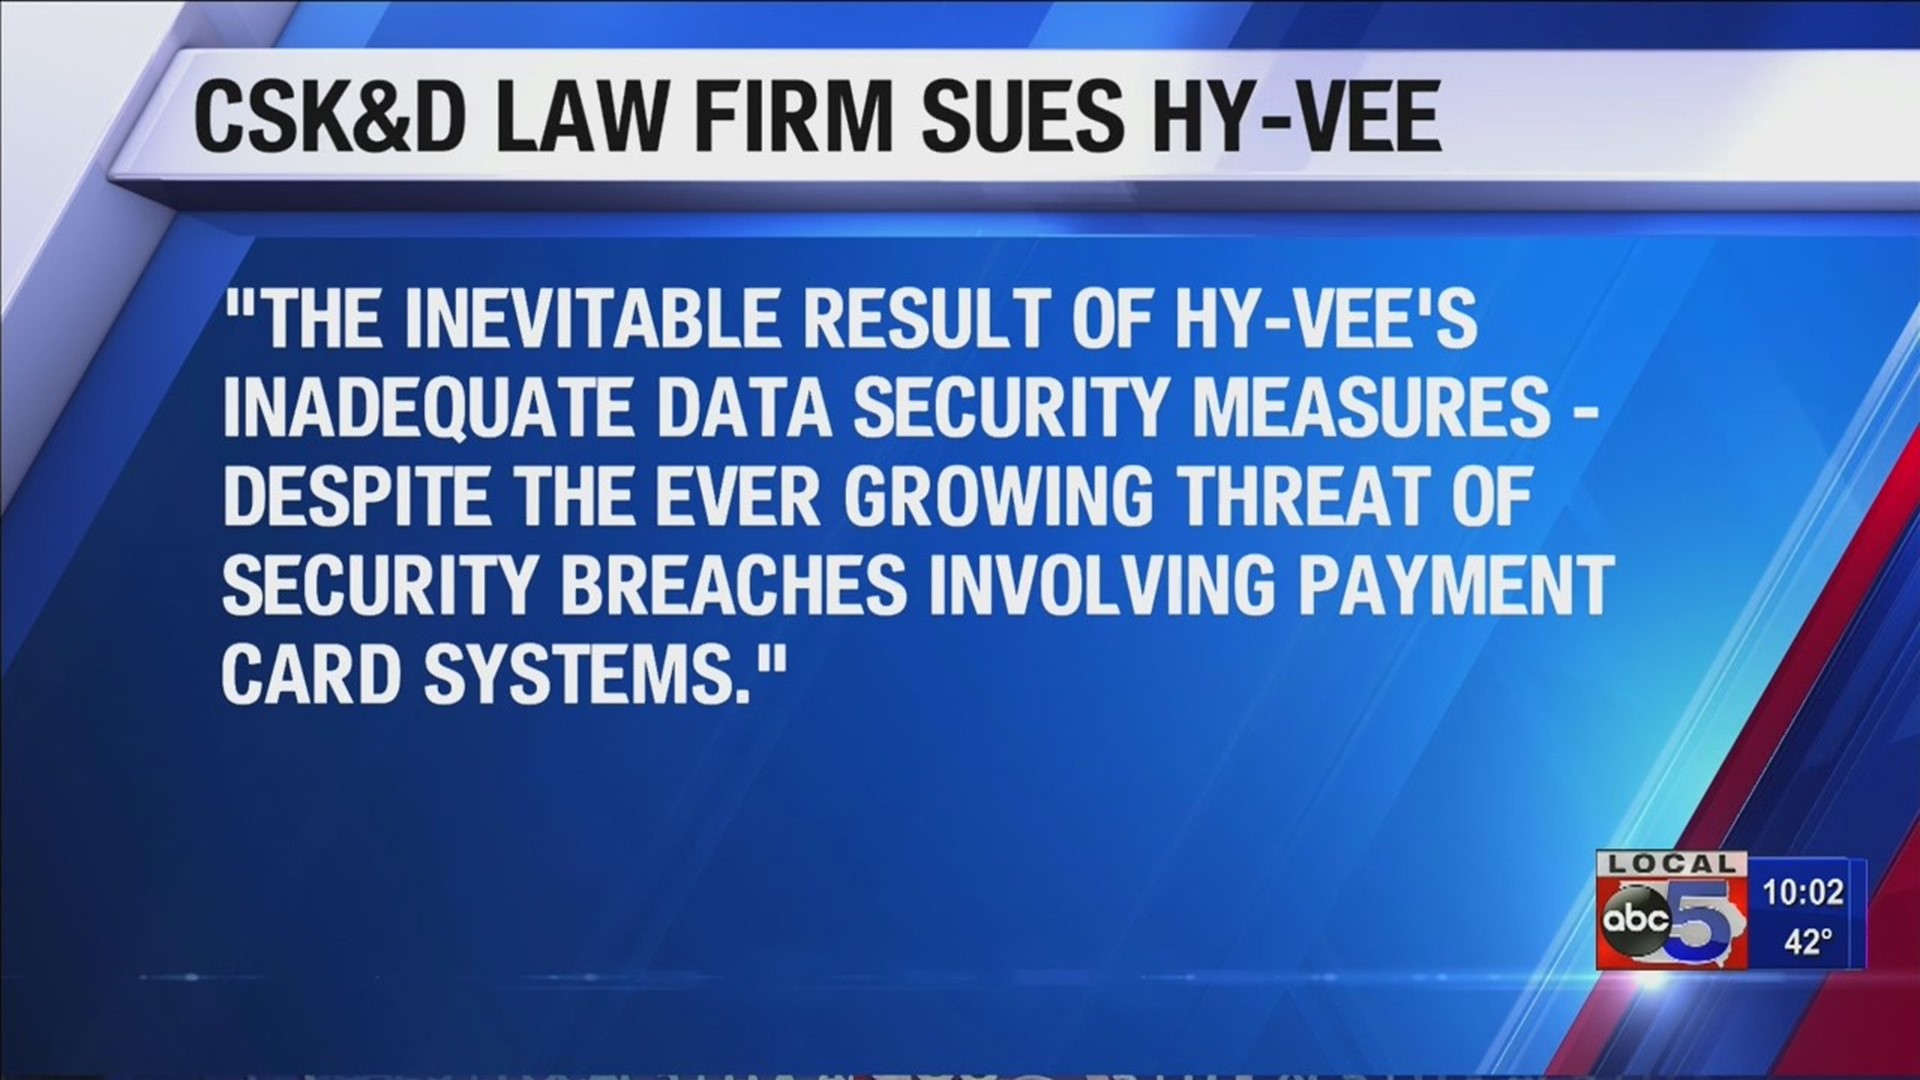 Law firm files class action lawsuit against Hy-Vee over data breach